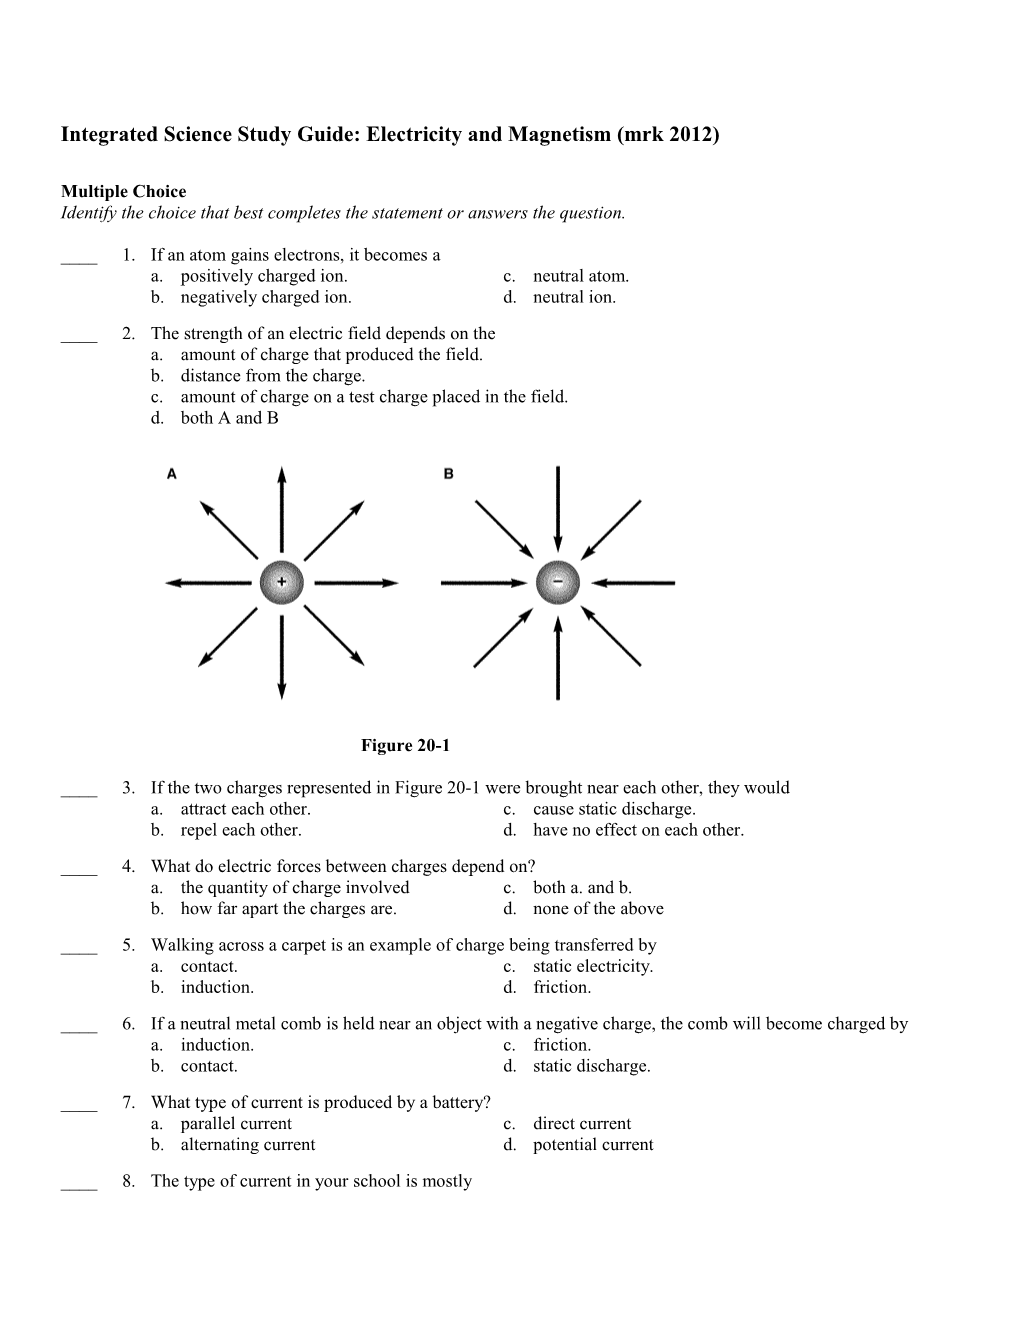 Integrated Science Study Guide: Electricity and Magnetism (Mrk 2012)